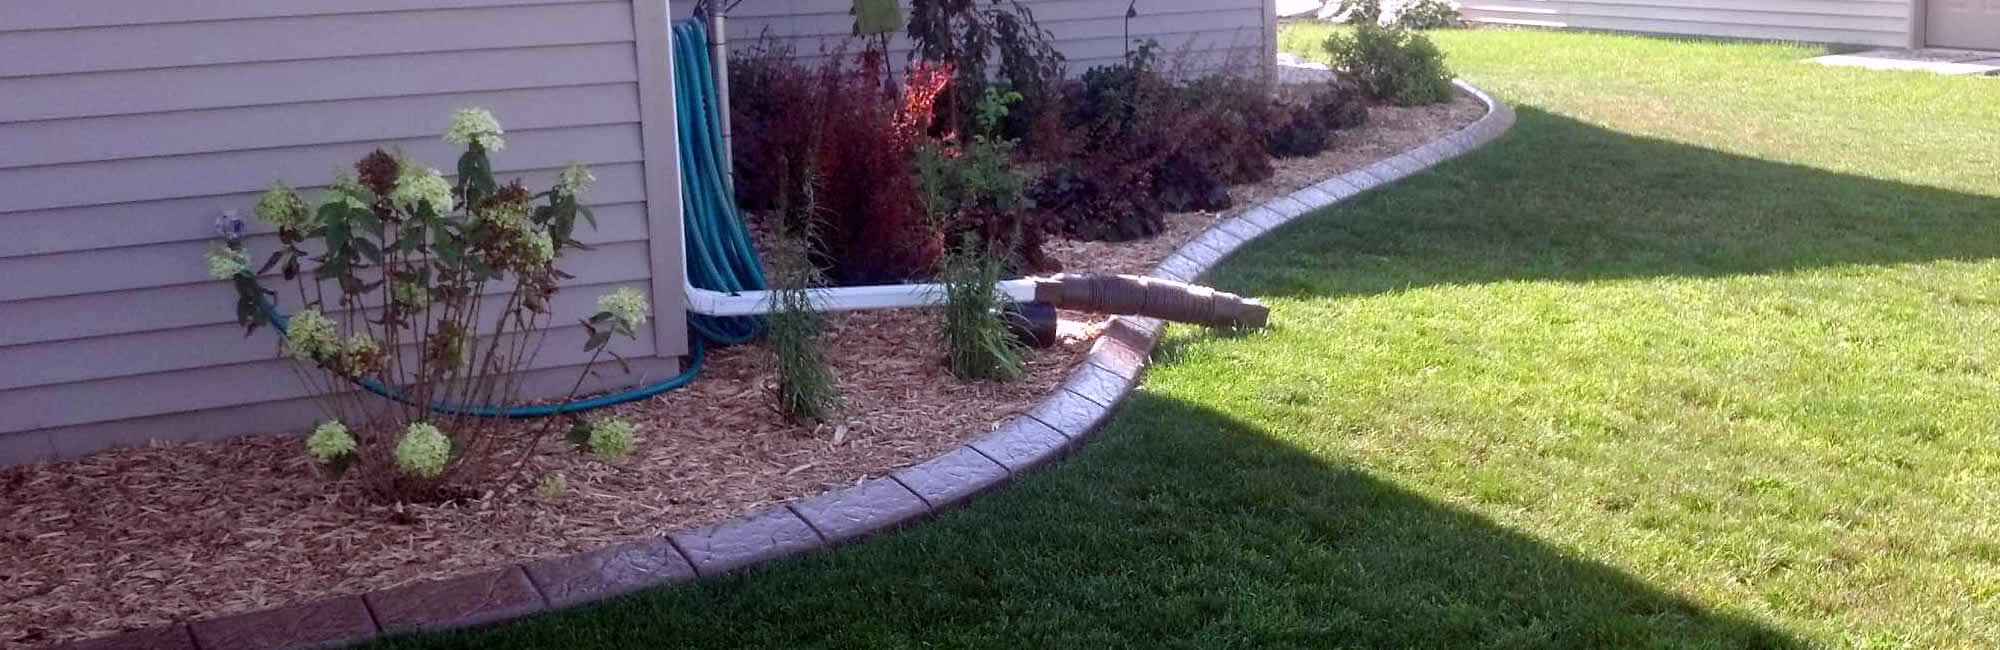 Landscape Concrete Curbing Benefits for Green Bay/Appleton area Homes and Businesses